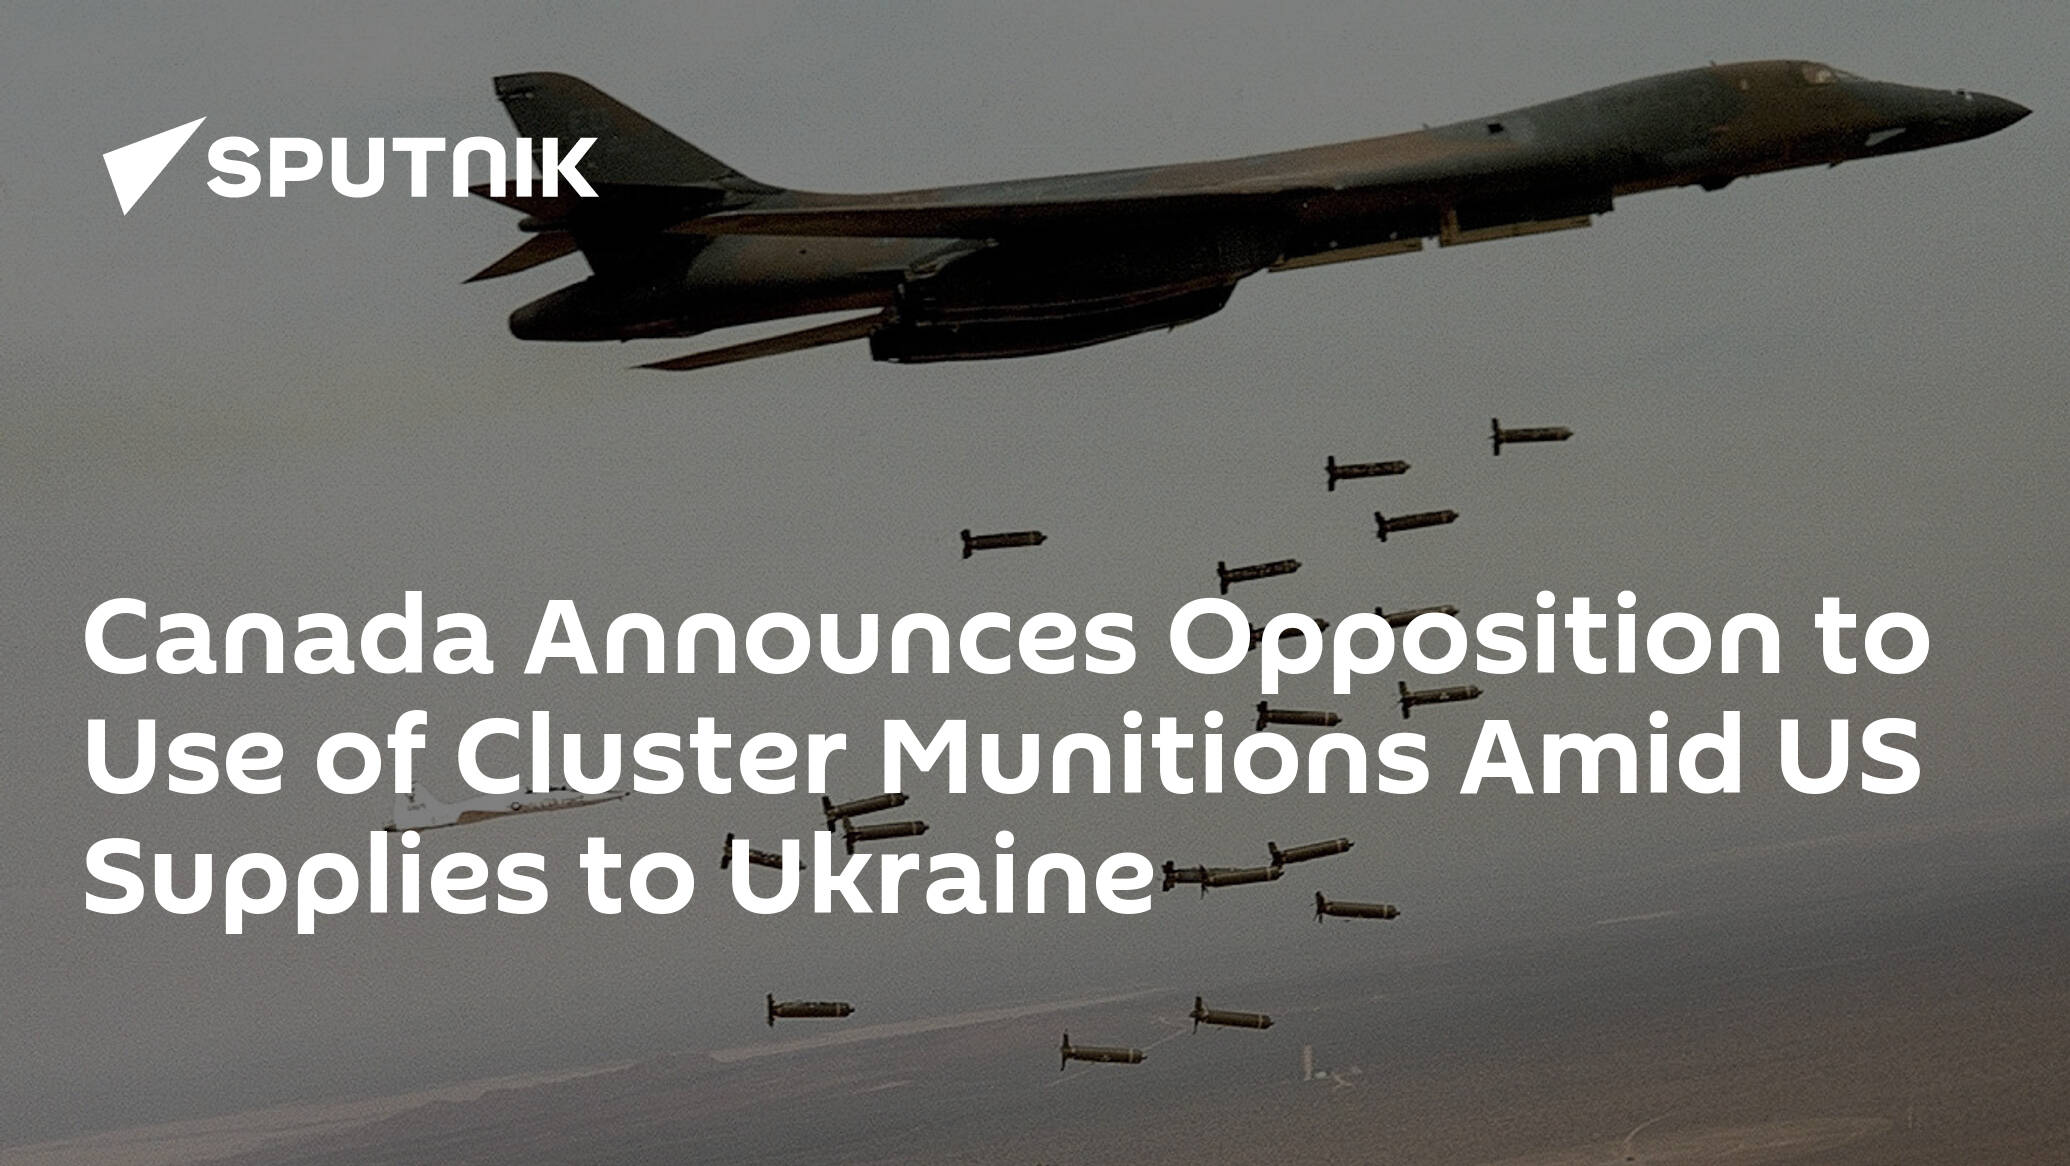 Canada Announces Opposition to Use of Cluster Munitions Amid US Supplies to Ukraine